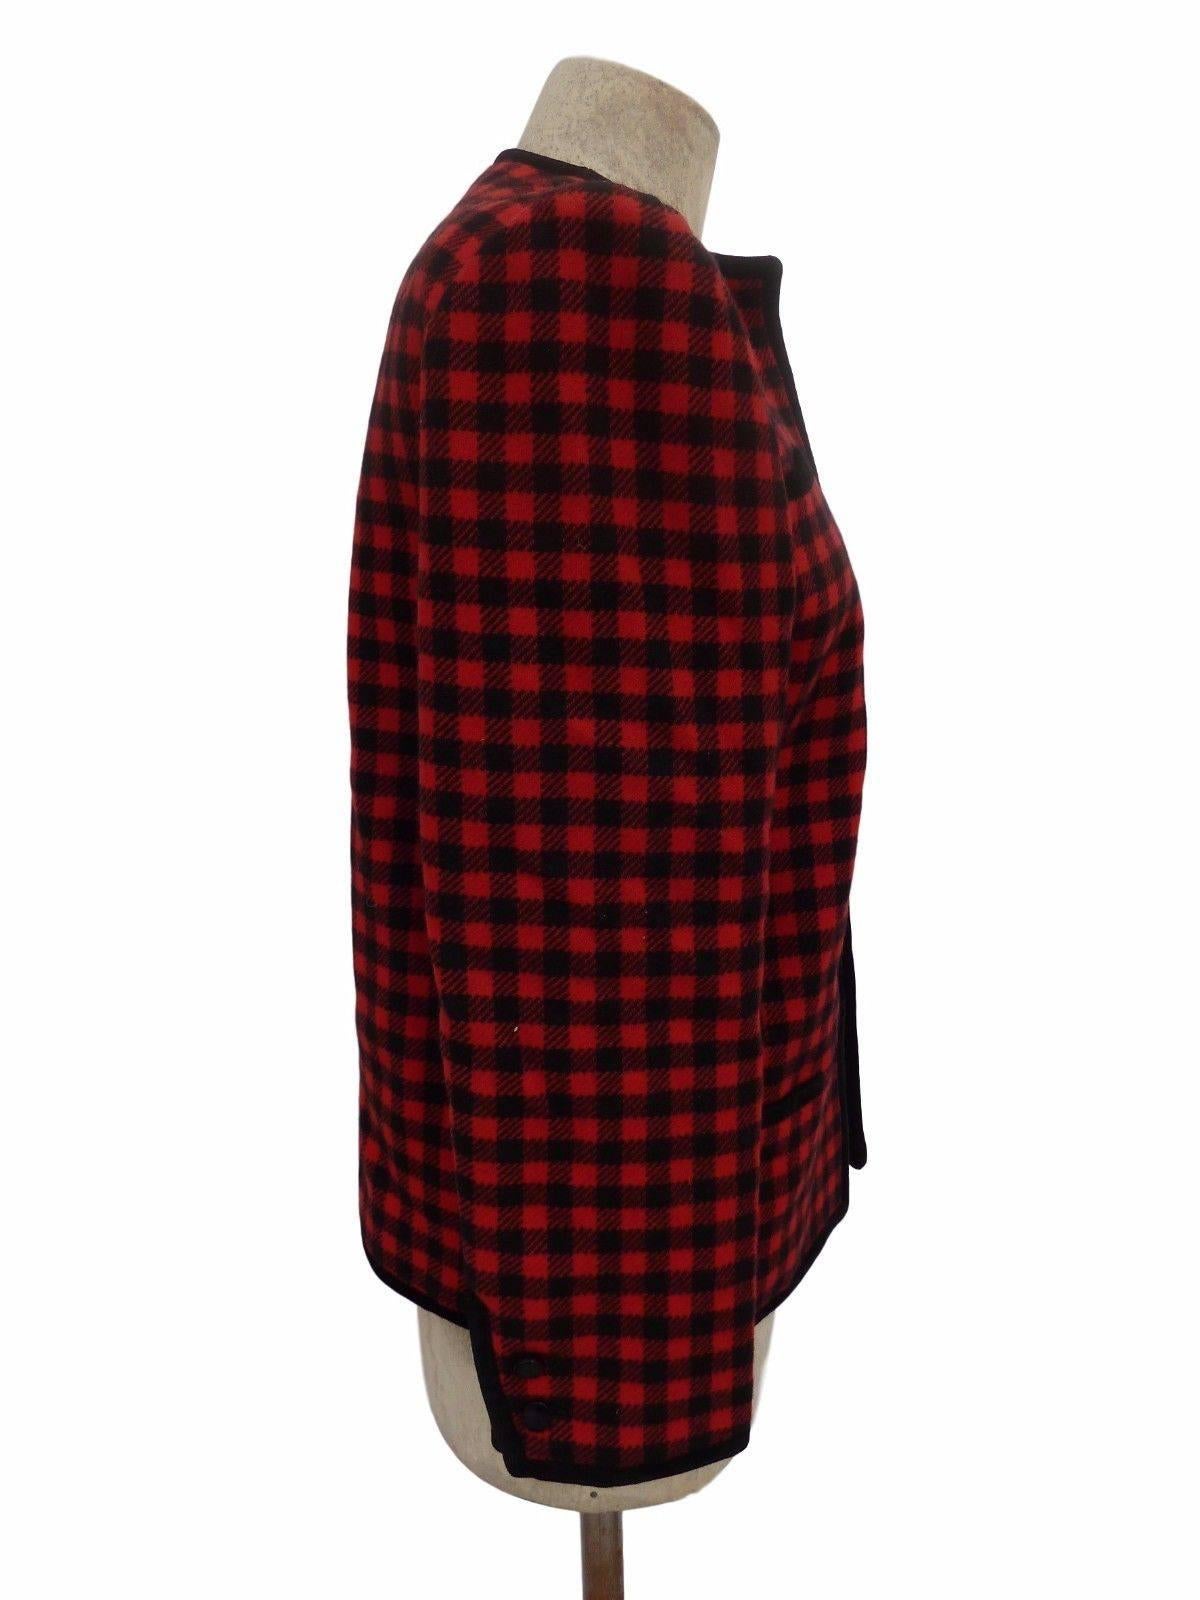 Vintage 1980s Valentino Boutique jacket - 100% wool with velvet inserts - Slim fit Beautiful black and red check motif Excellent vintage condition 

Black and red - 100% wool - Size: 40 (IT) / 34 (NL/DE) / 8 (UK)

Shoulder: 44 cm 
Armpit: 48 cm